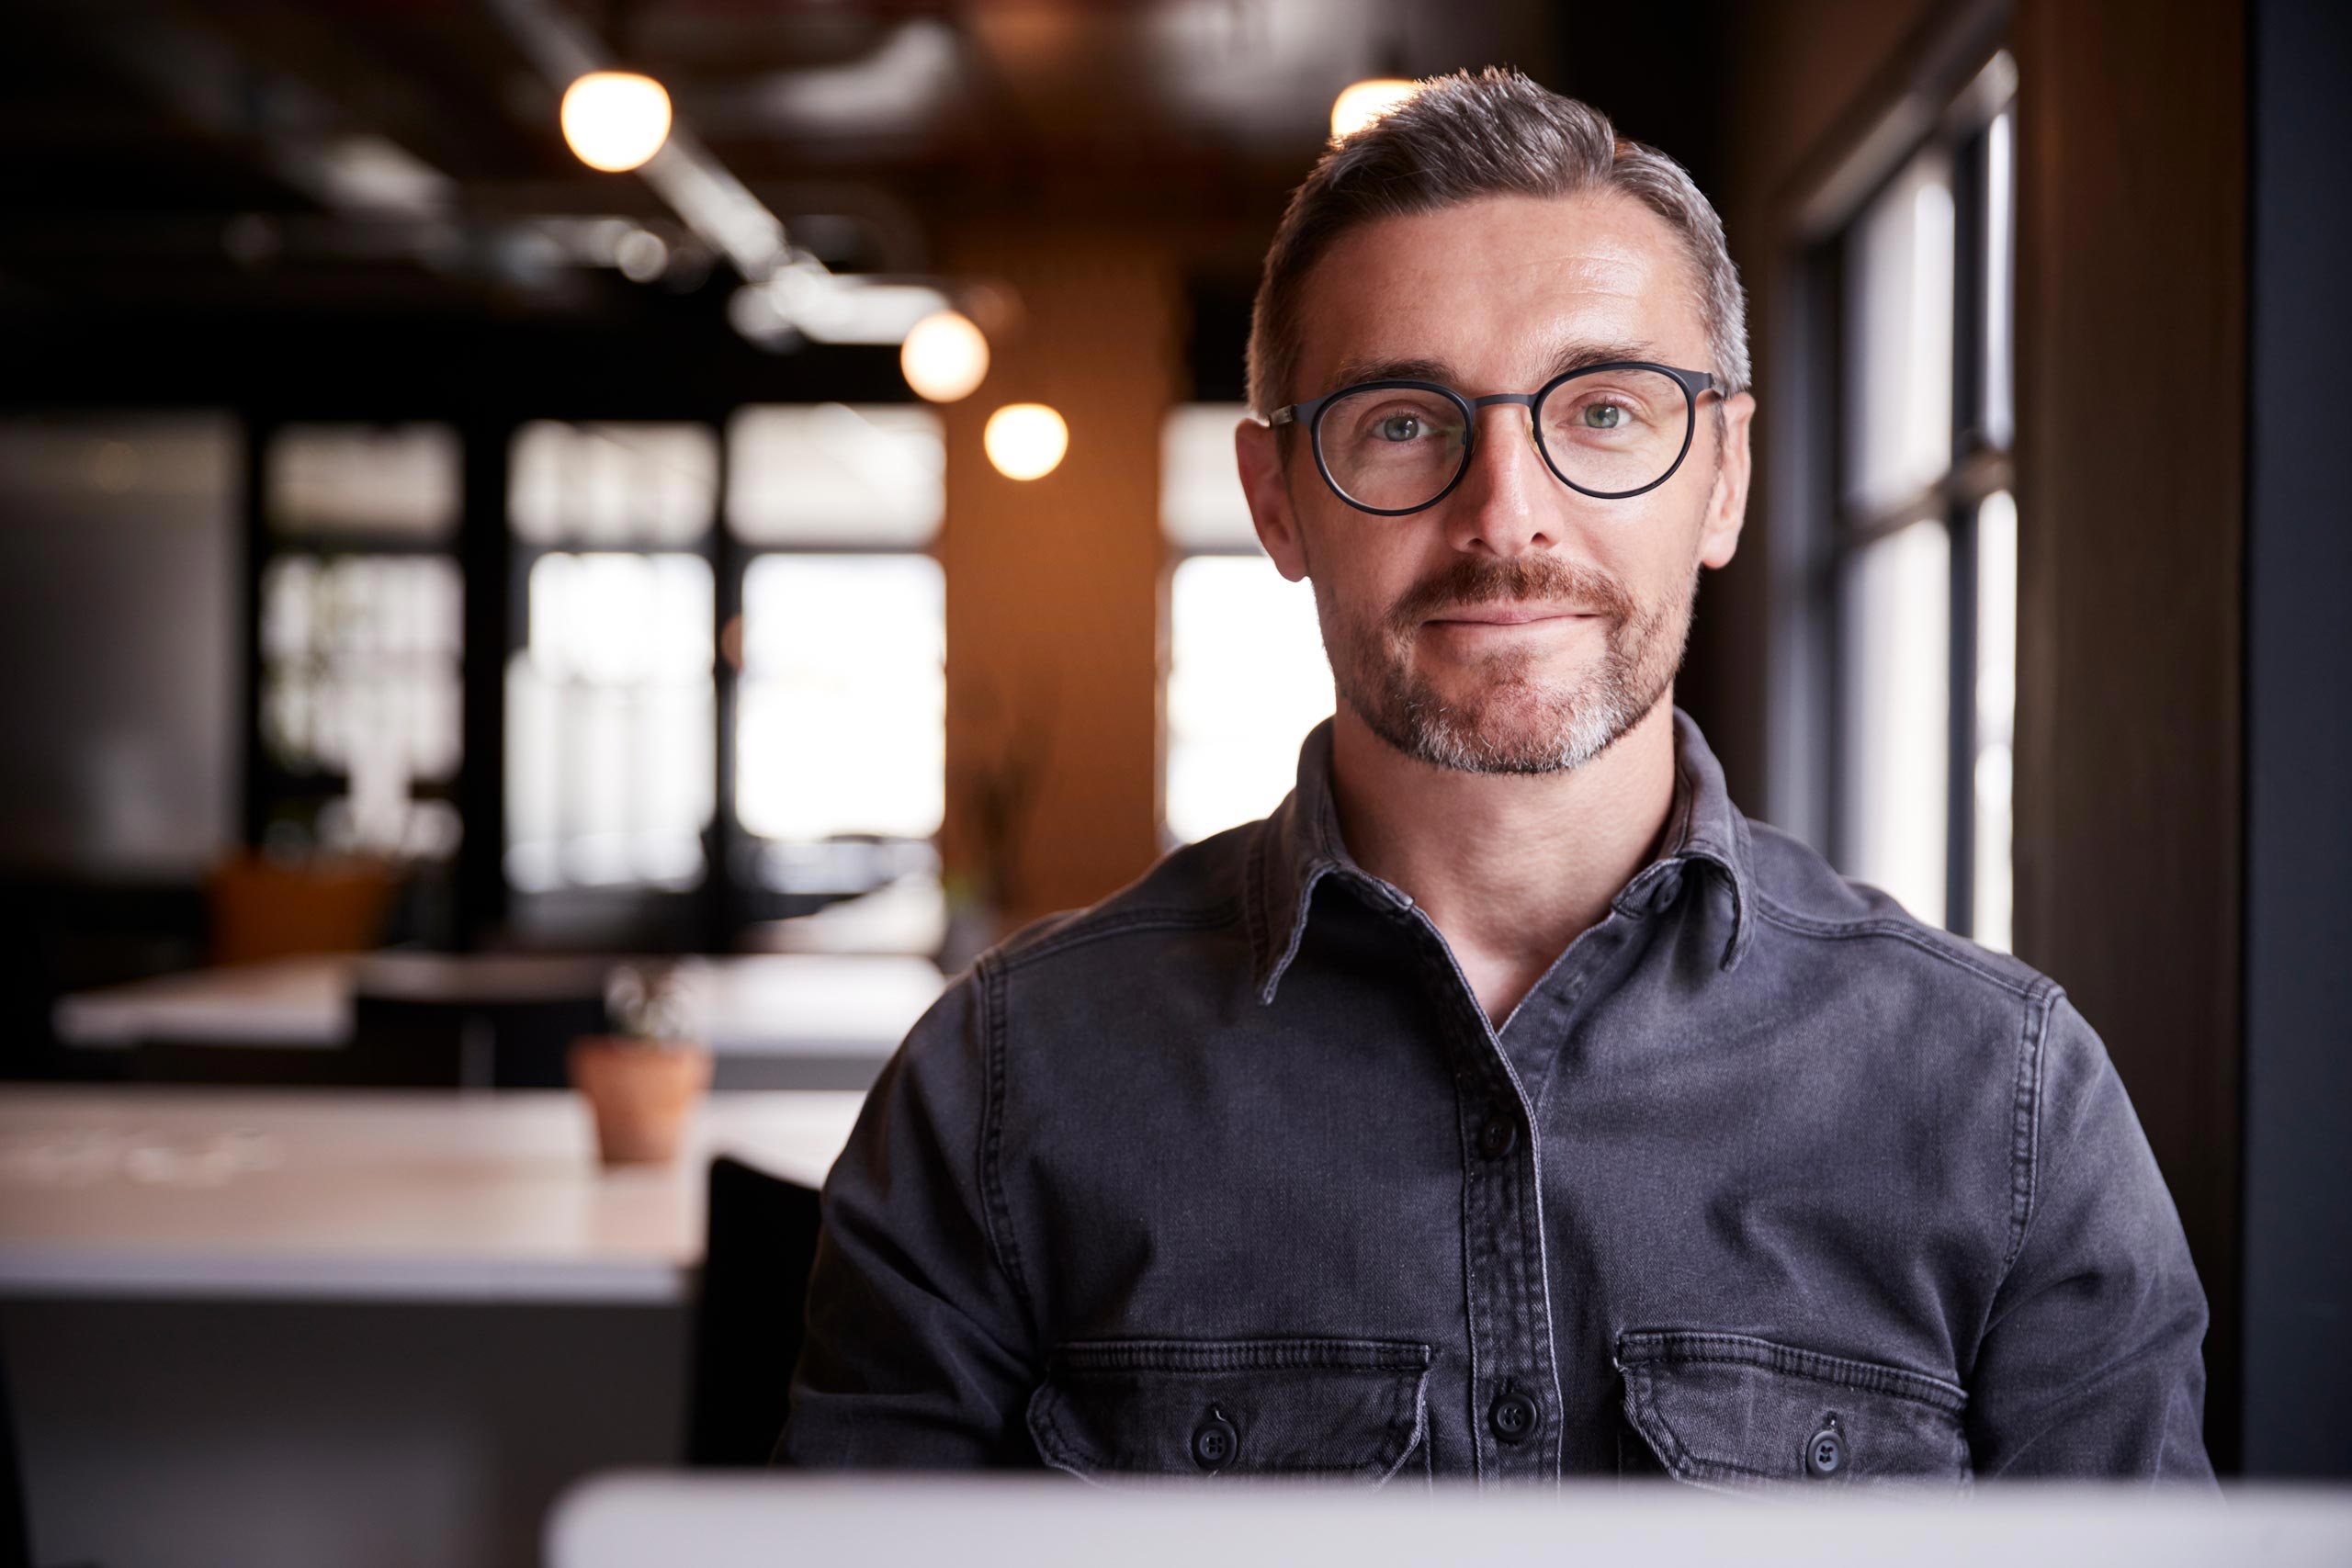 Smiling man wearing glasses in an open plan office space.